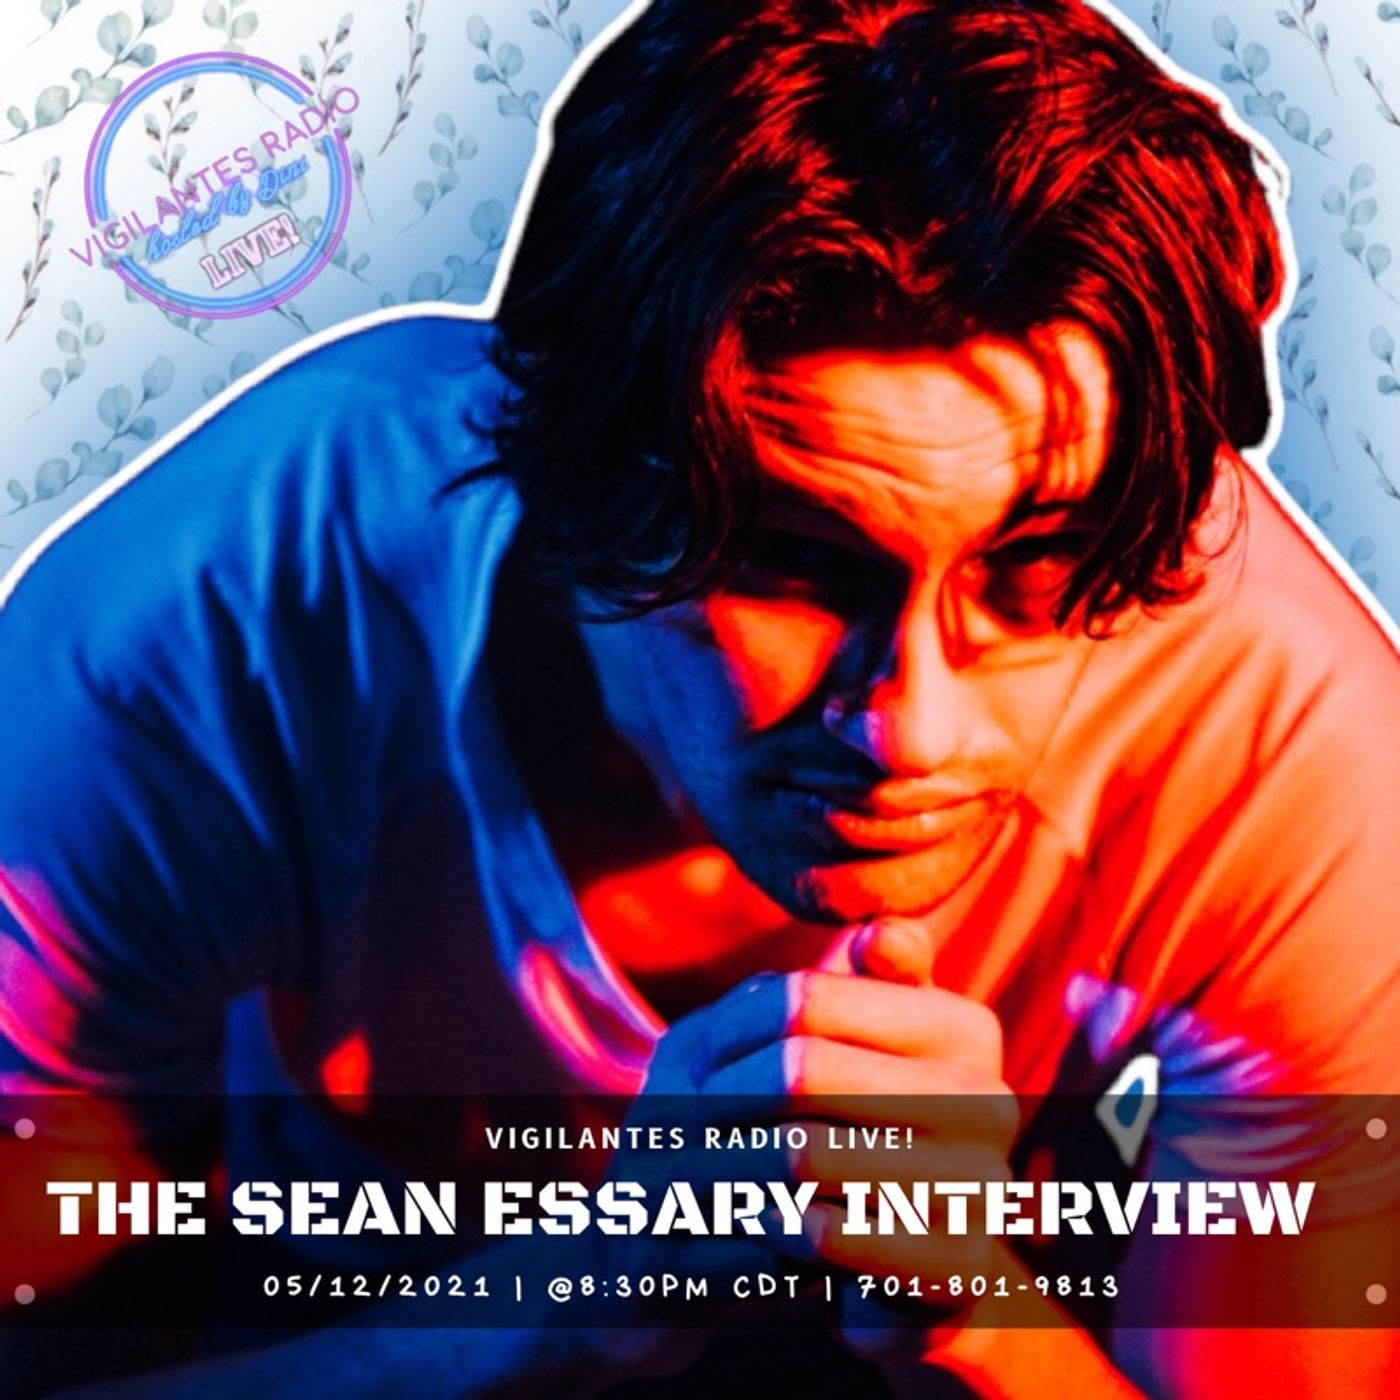 The Sean Essary Interview. Image